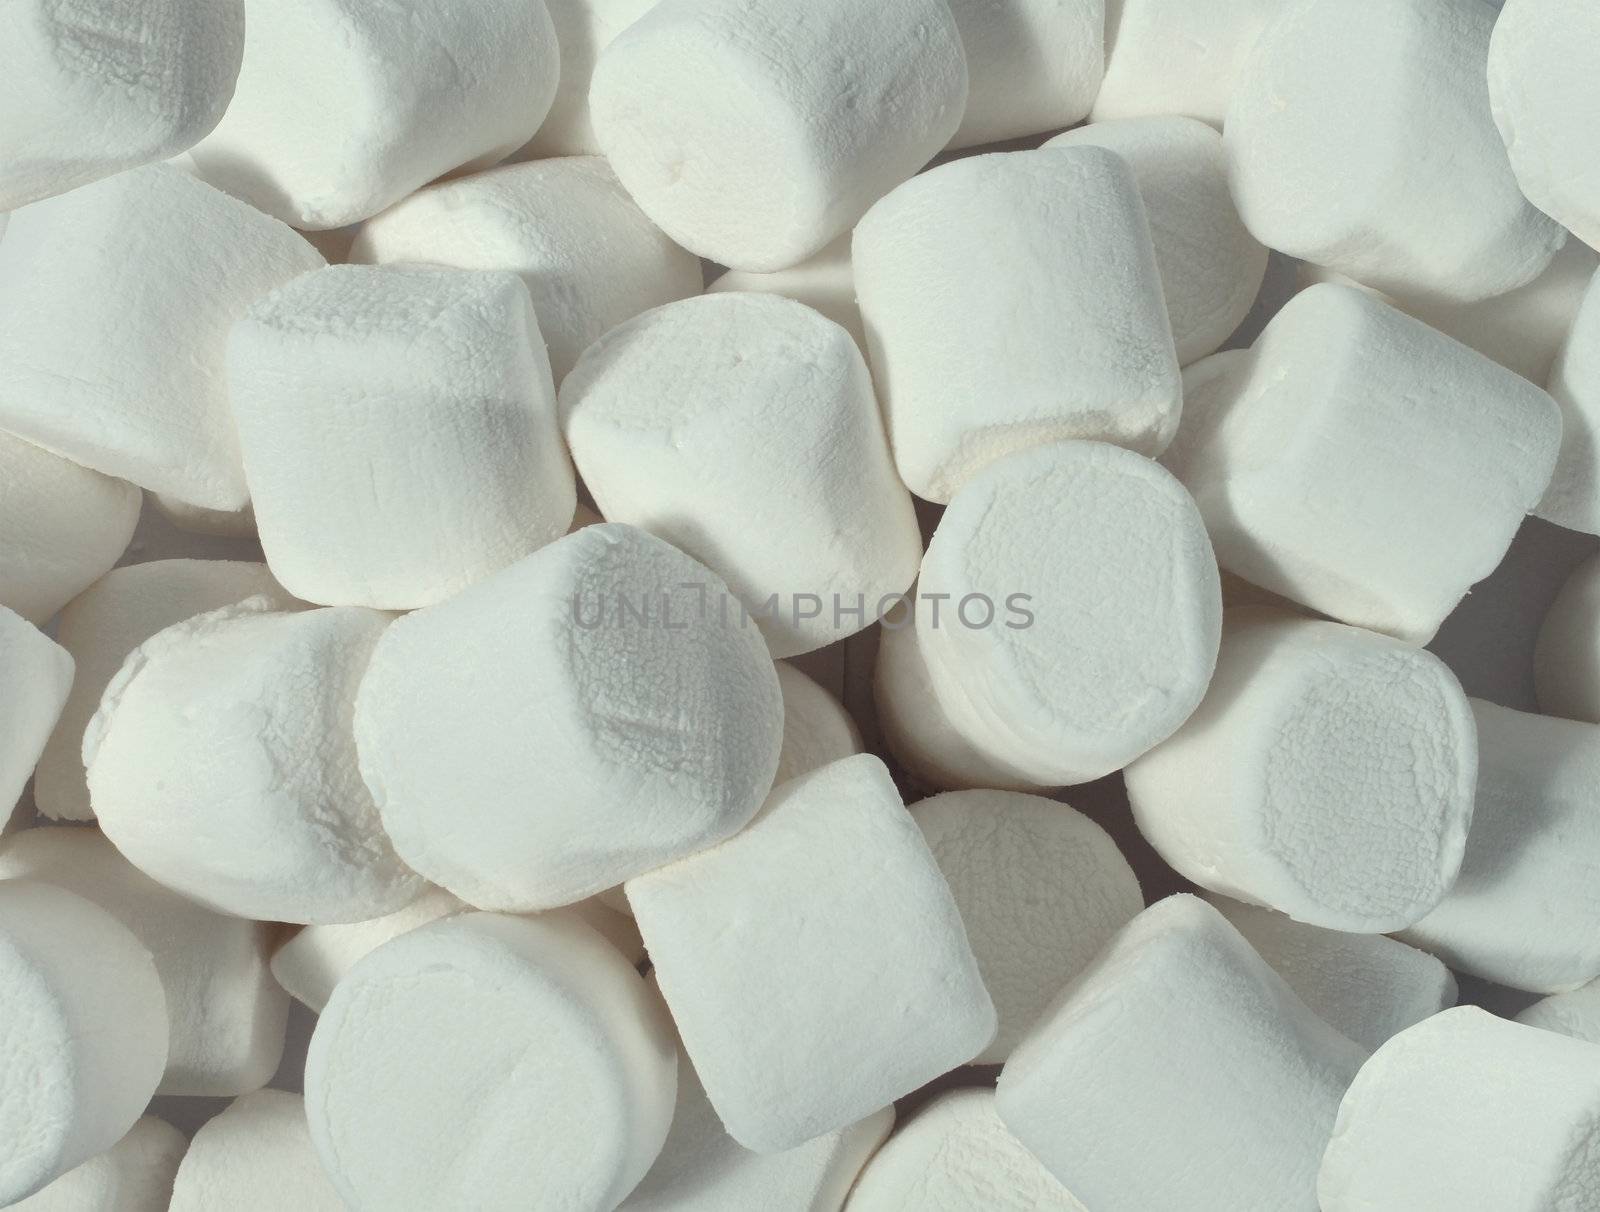 Marshmallows candy in a group as soft white confectionery store display representing a fun sweet treat for kids and a dessert snack for older children.